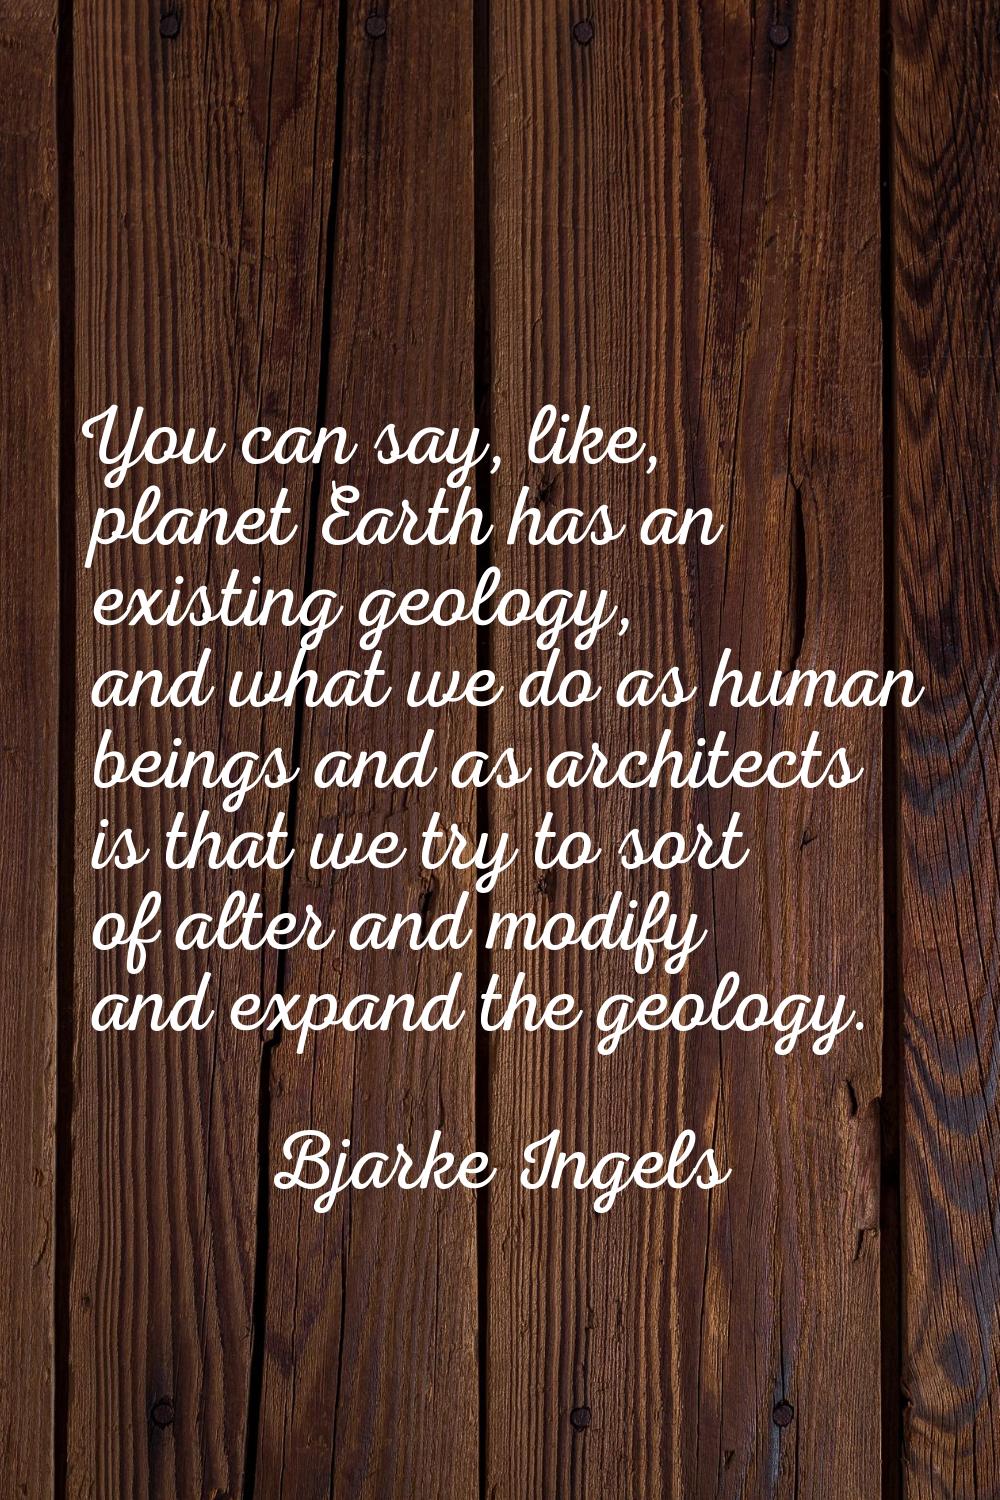 You can say, like, planet Earth has an existing geology, and what we do as human beings and as arch